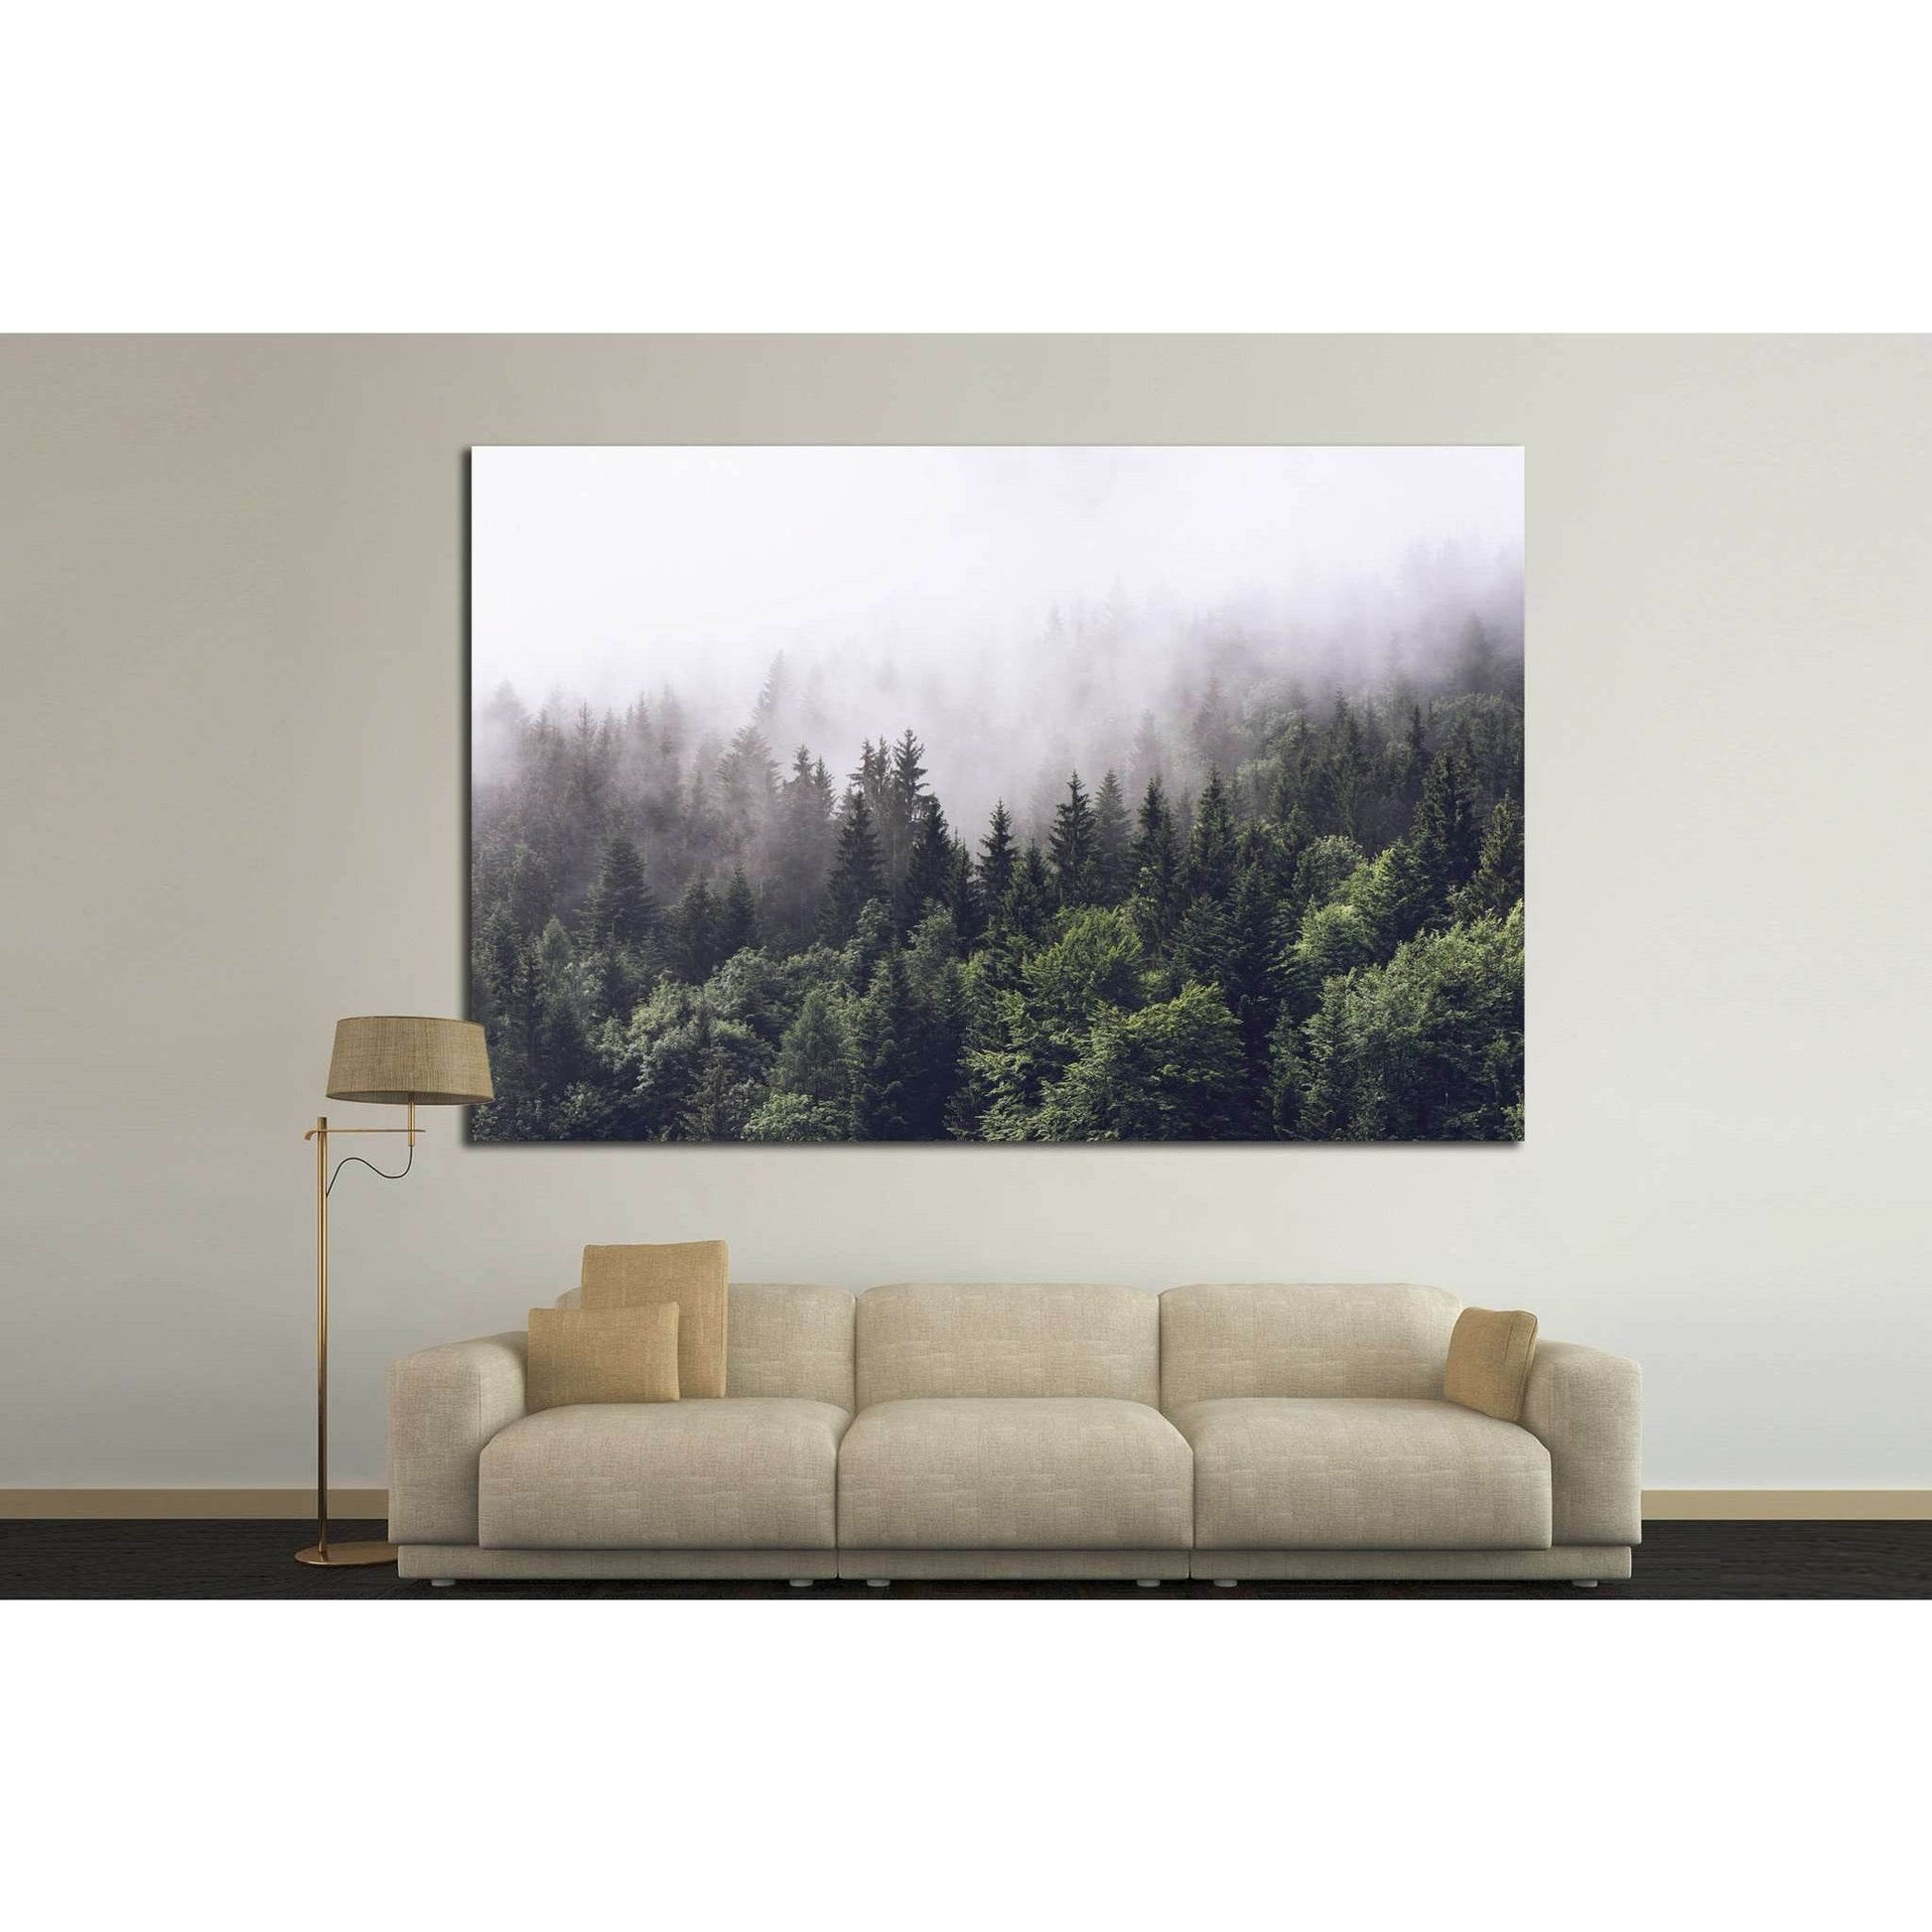 Misty Forest Panorama: Triptych Canvas ArtThis canvas print triptych presents a lush evergreen forest veiled in fog, offering a sense of mystery and natural beauty. As wall decor, it creates a continuous panoramic view, making it an impactful wall art cho